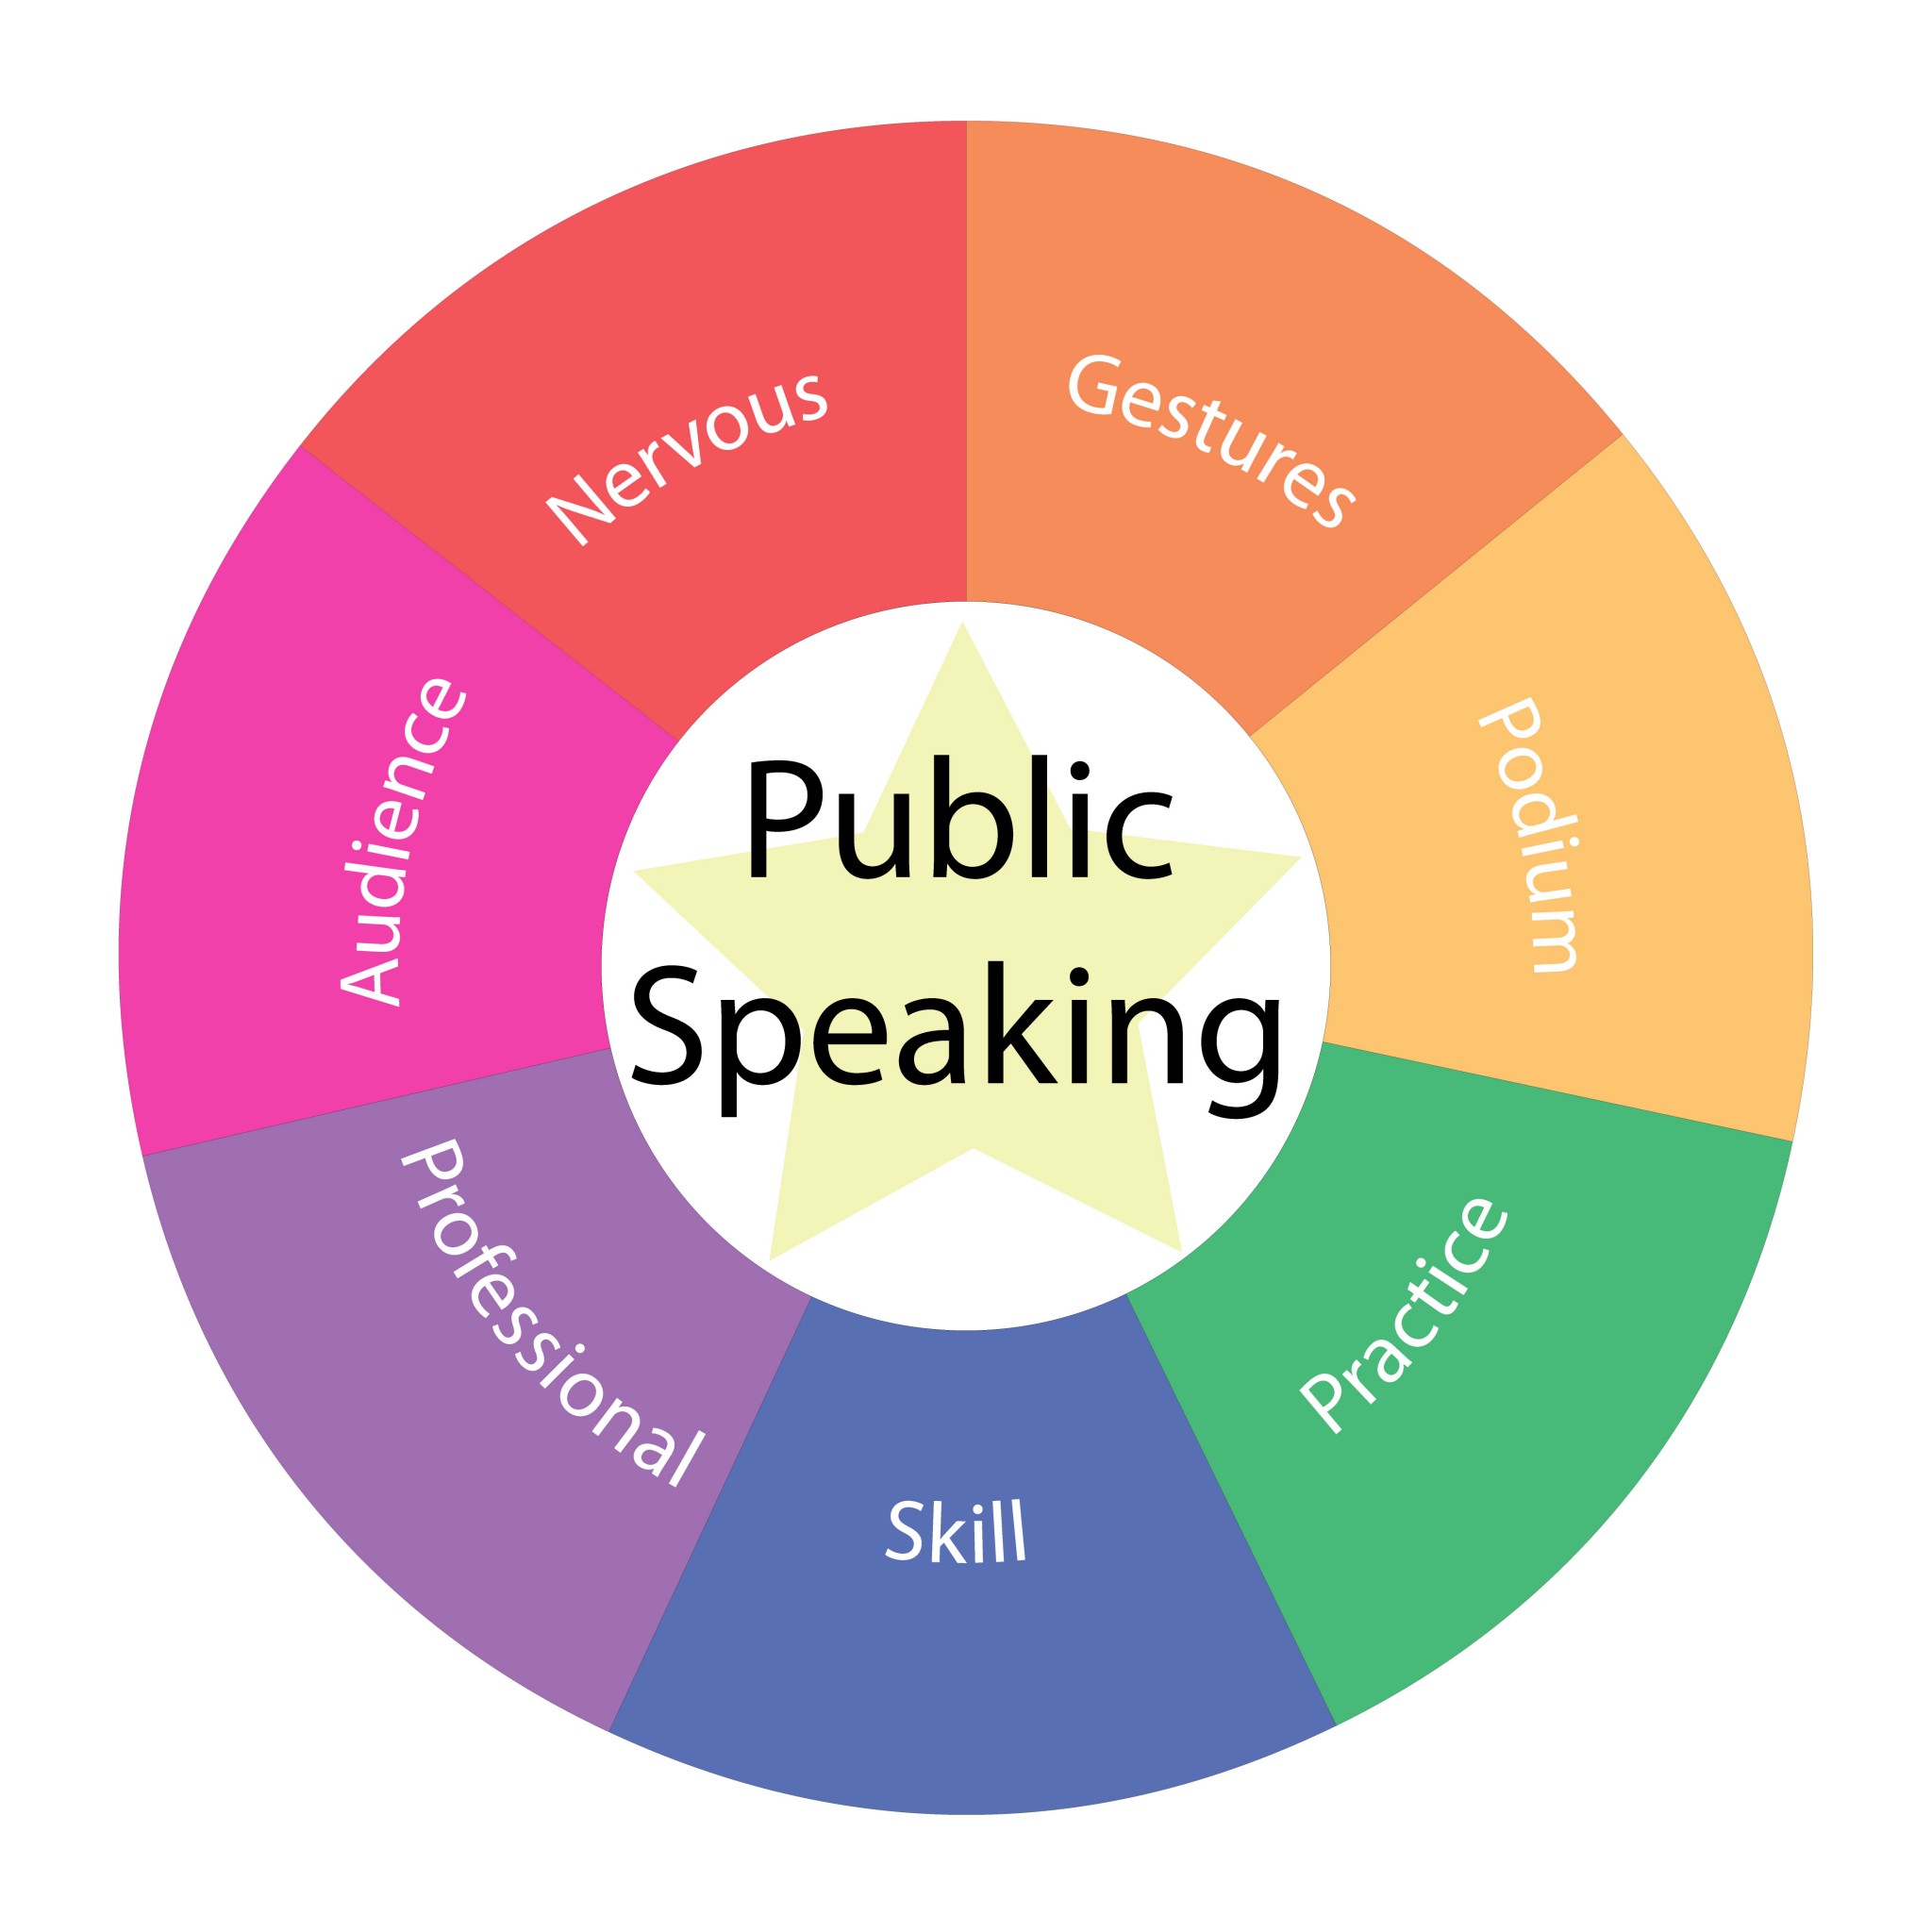 Elementary Public Speaking Nextide Academy Learning Center Purcellville Stem Based After